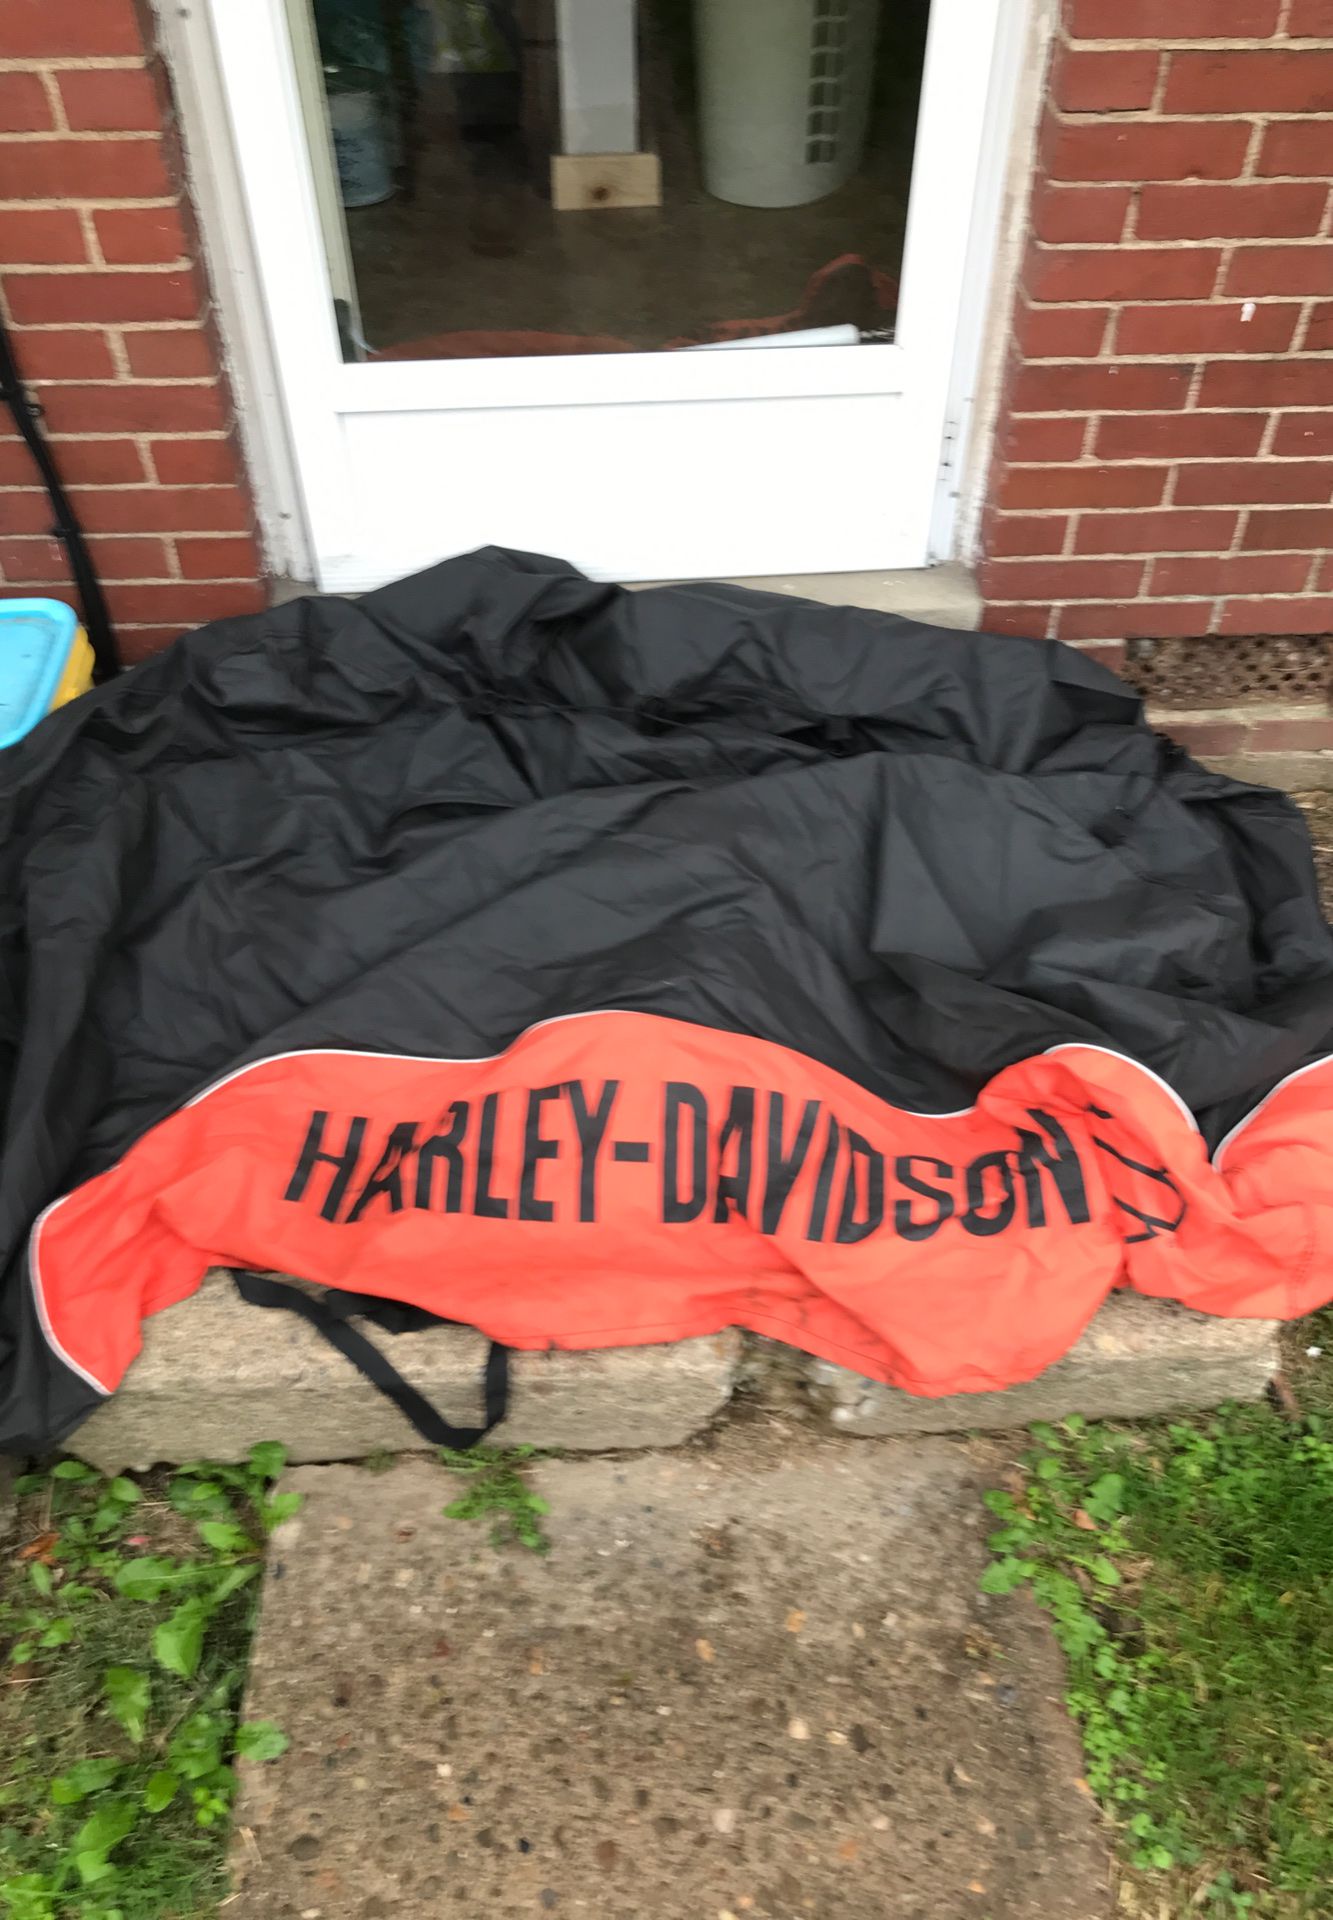 Harley Davidson motorcycle cover fits most bikes